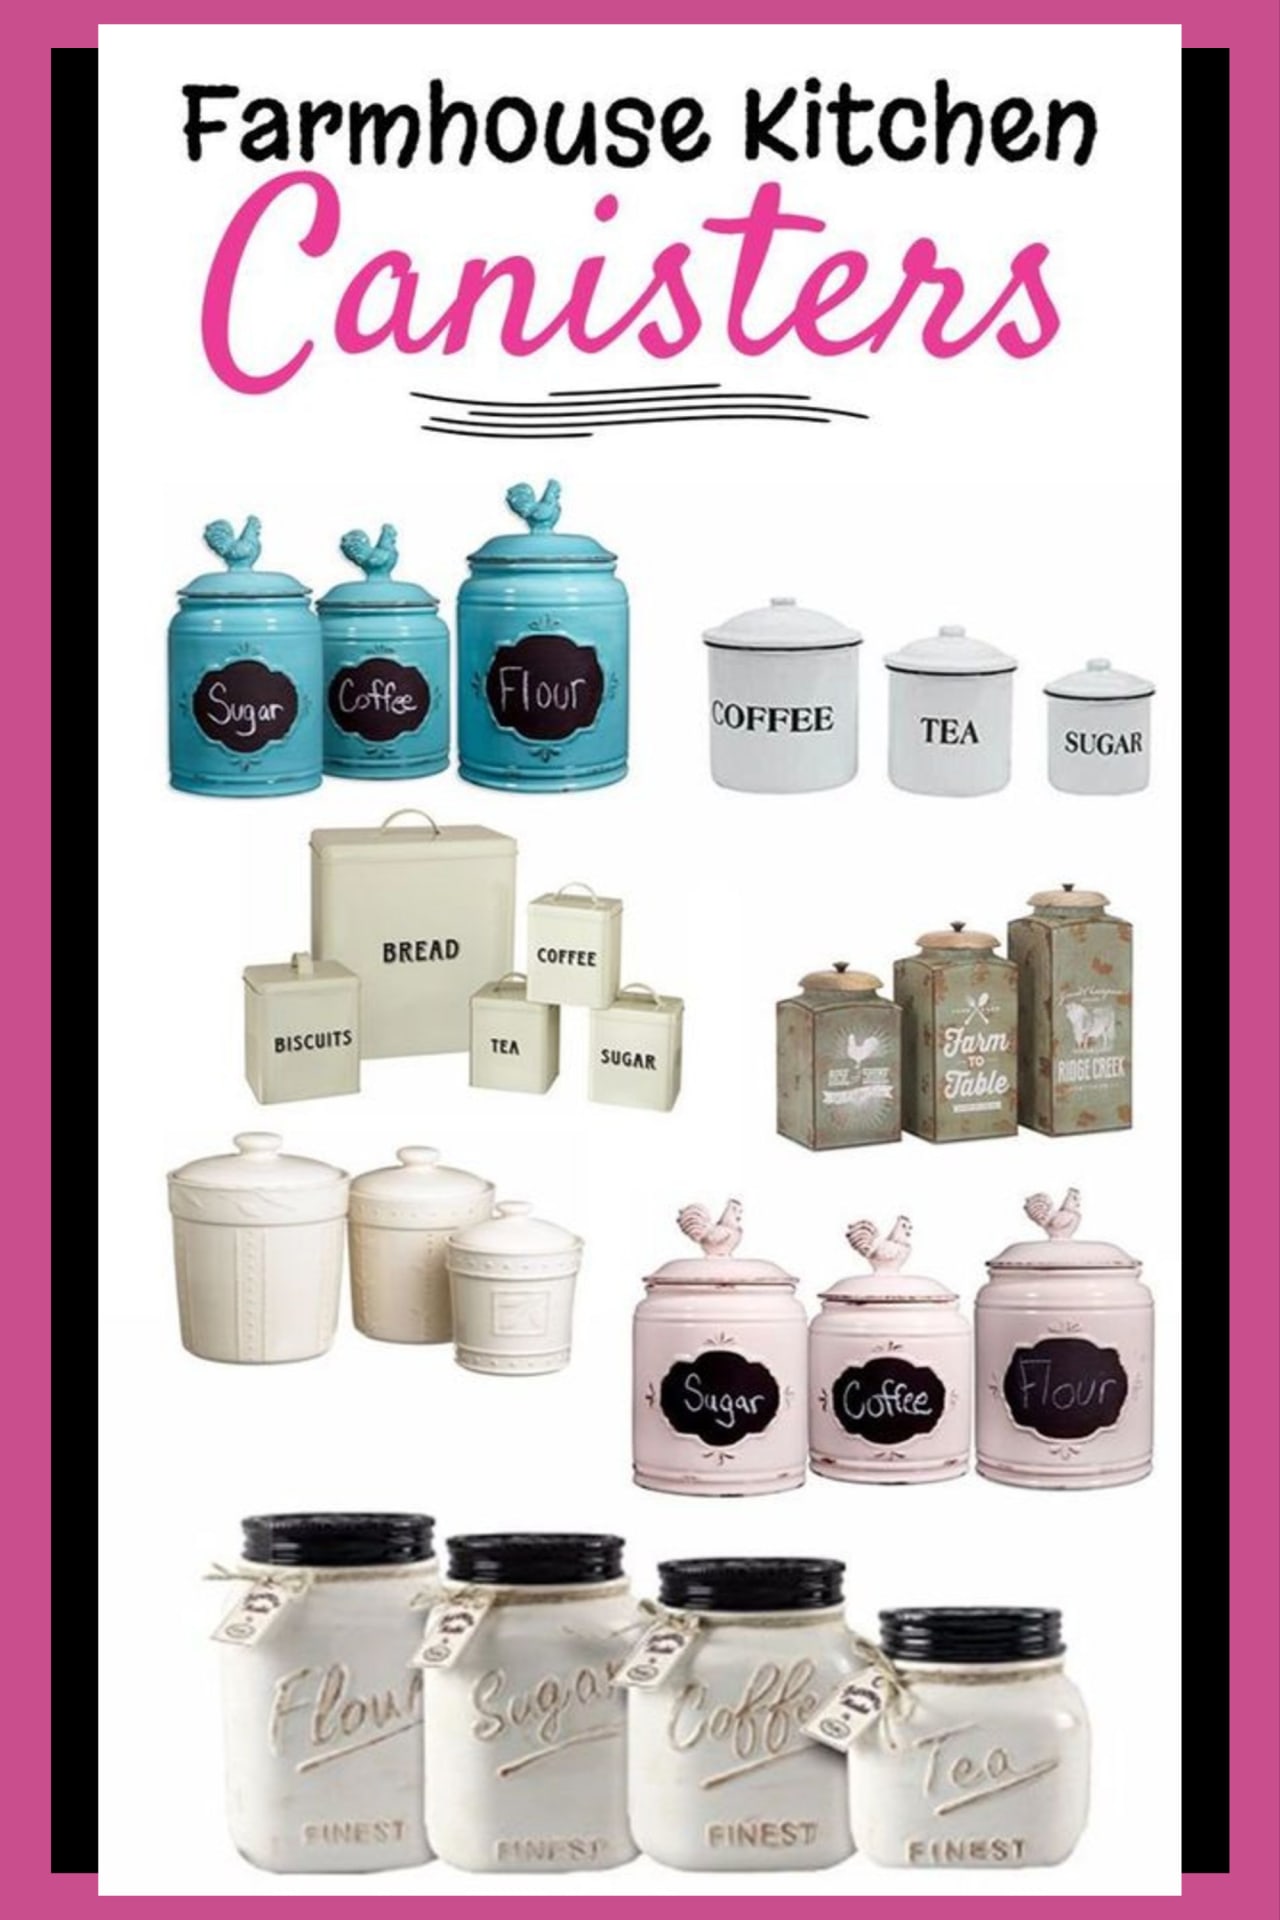 Farmhouse canisters for my kitchen!  LOVE all these farmhouse canister sets, tins, ceramic mason jars canisters, vintage canisters and bread boxes - super cute canisters set ideas for a country farmhouse kitchen